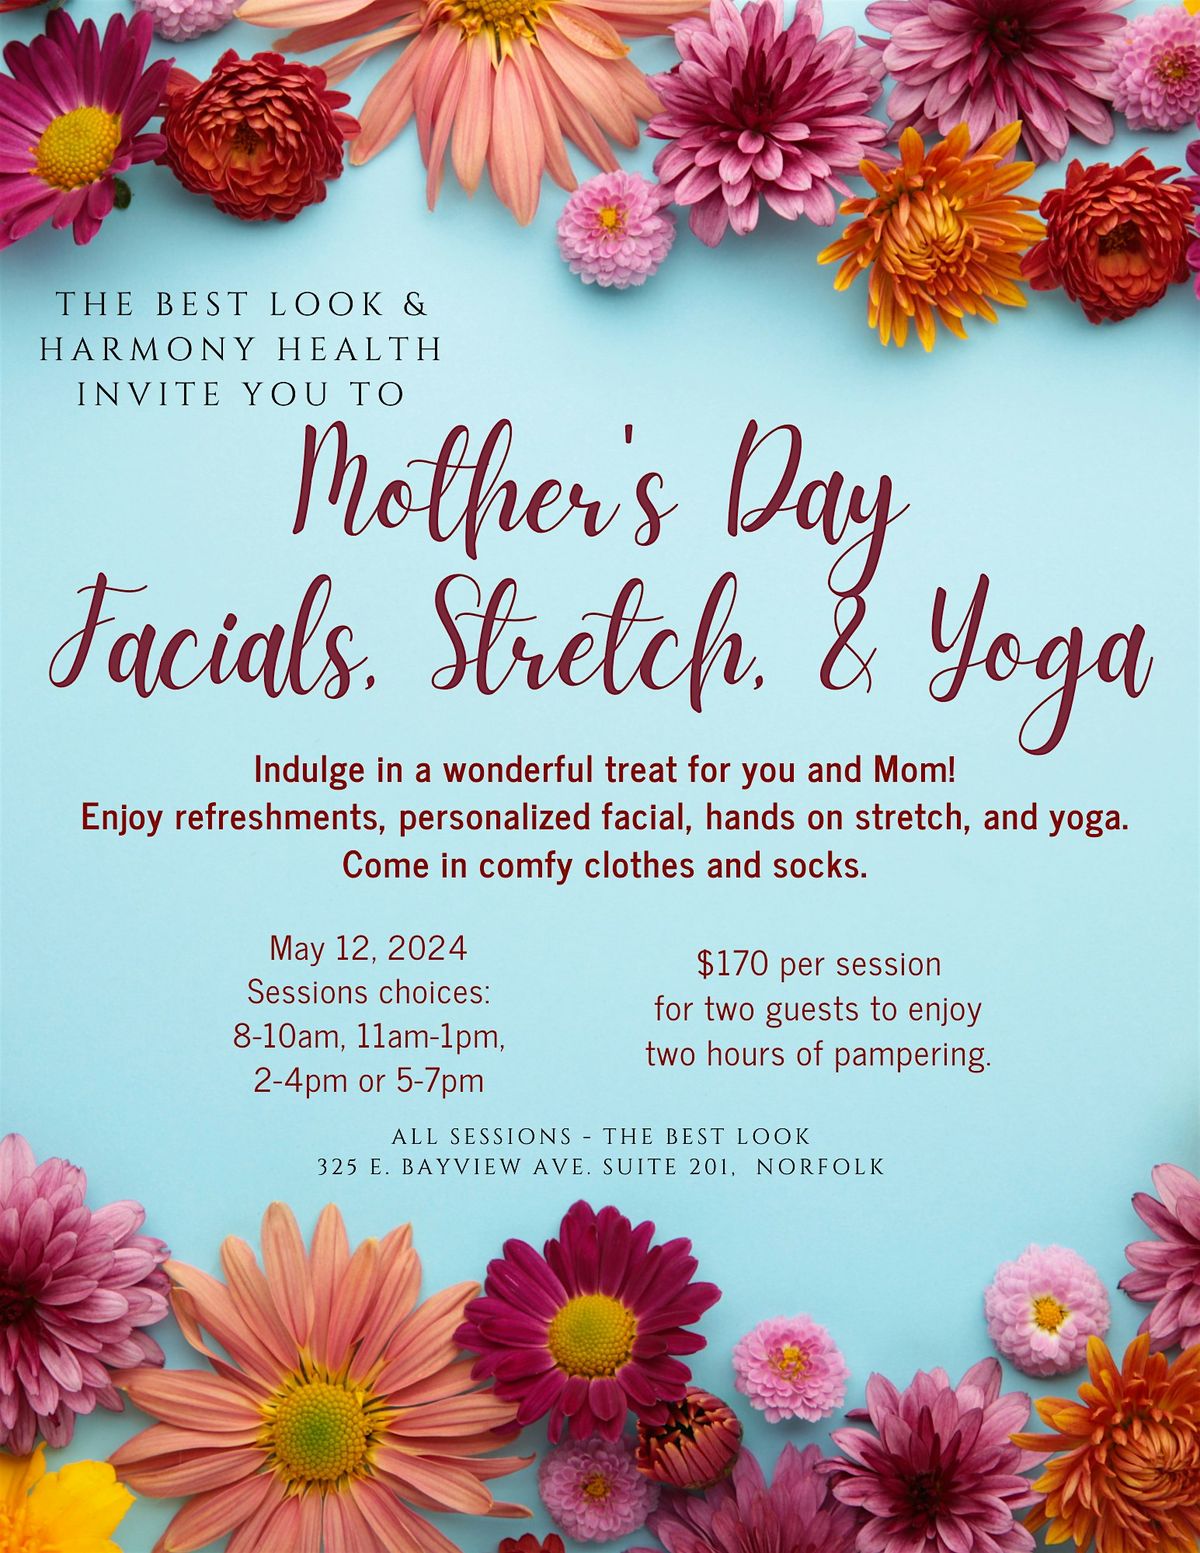 Mother's Day: Facials, Stretch & Yoga for you and Mom!